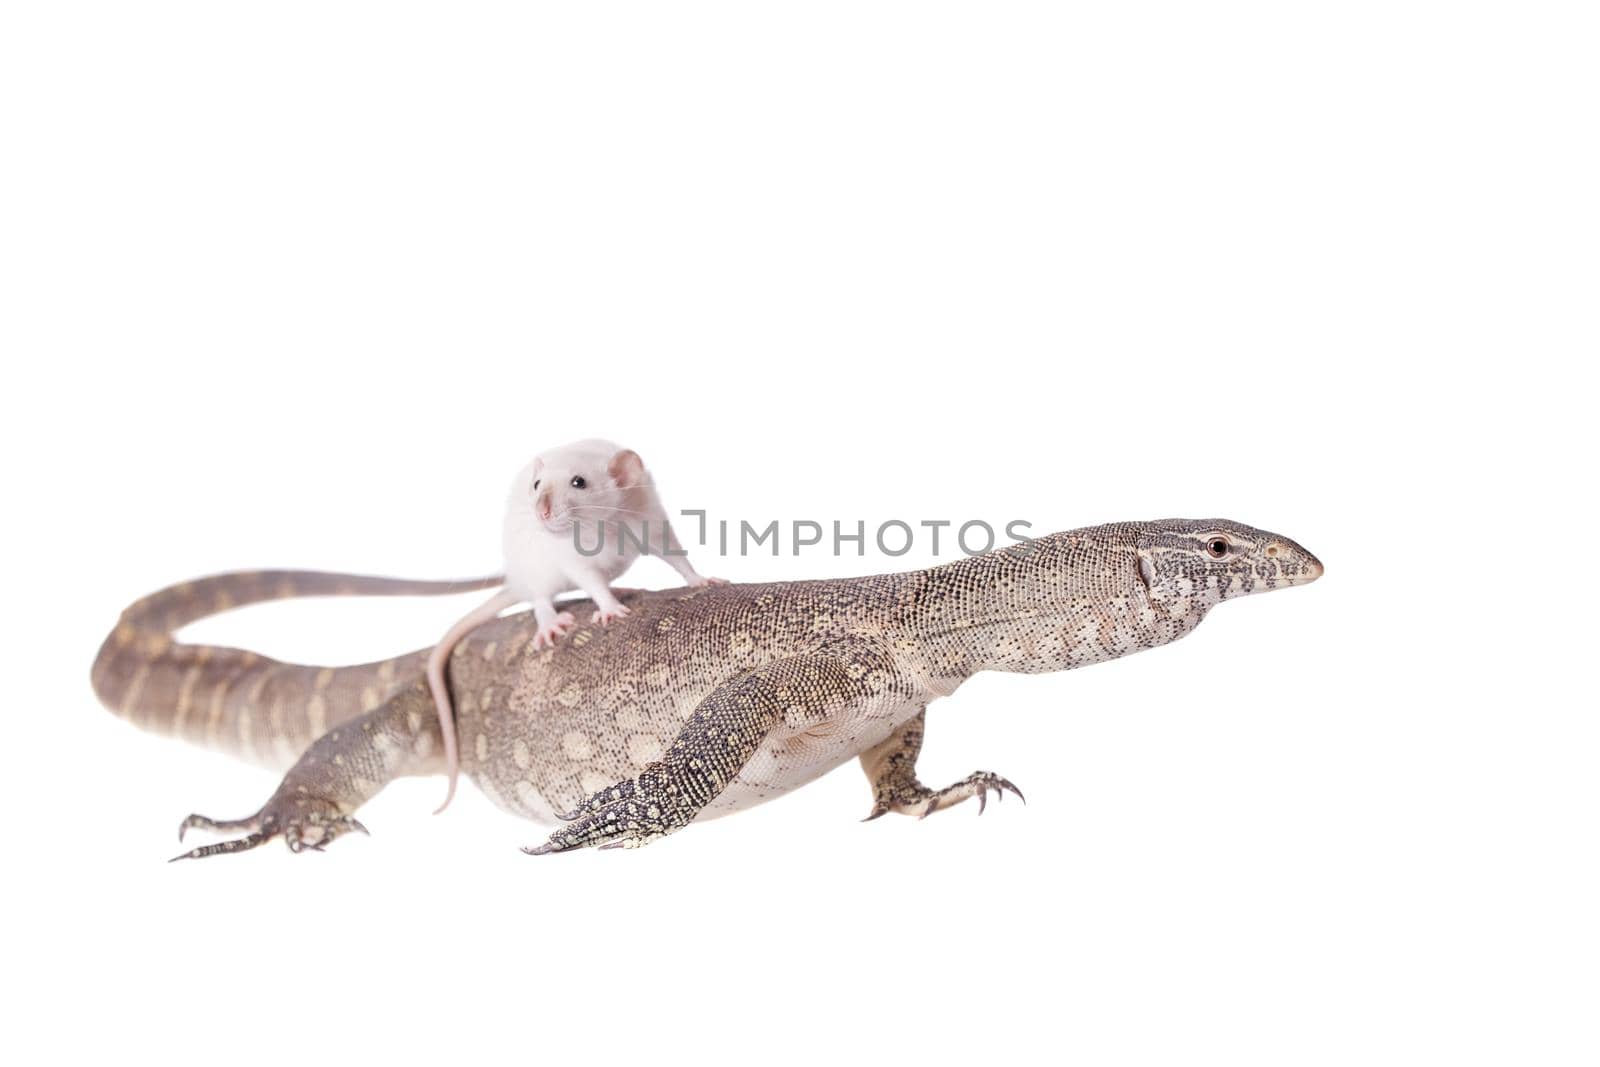 Nile monitor on white background by RosaJay